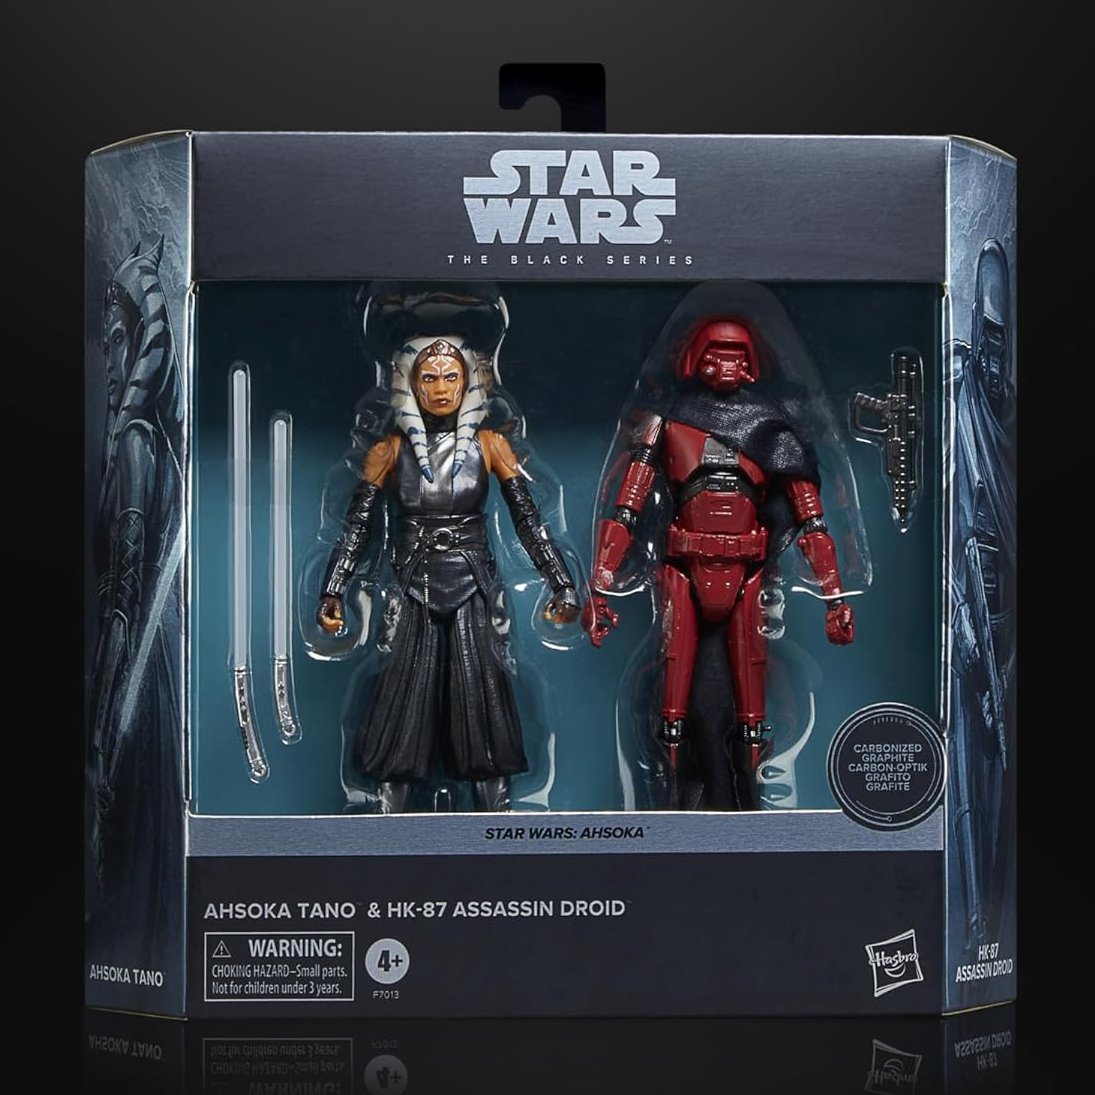 ⏰⚡️ Limited Time Deal! -- Amazon Exclusive Star Wars The Black Series Ahsoka Tano & HK-87 Assassin Droid 2-Pack is discounted to $27.99 (Reg. $59.99) Link: amzn.to/3UuA14W #Ad #StarWars #StarWarsDay #MayThe4th #MayTheForceBeWithYou #MayTheFourthBeWithYou #MayTheFourth…